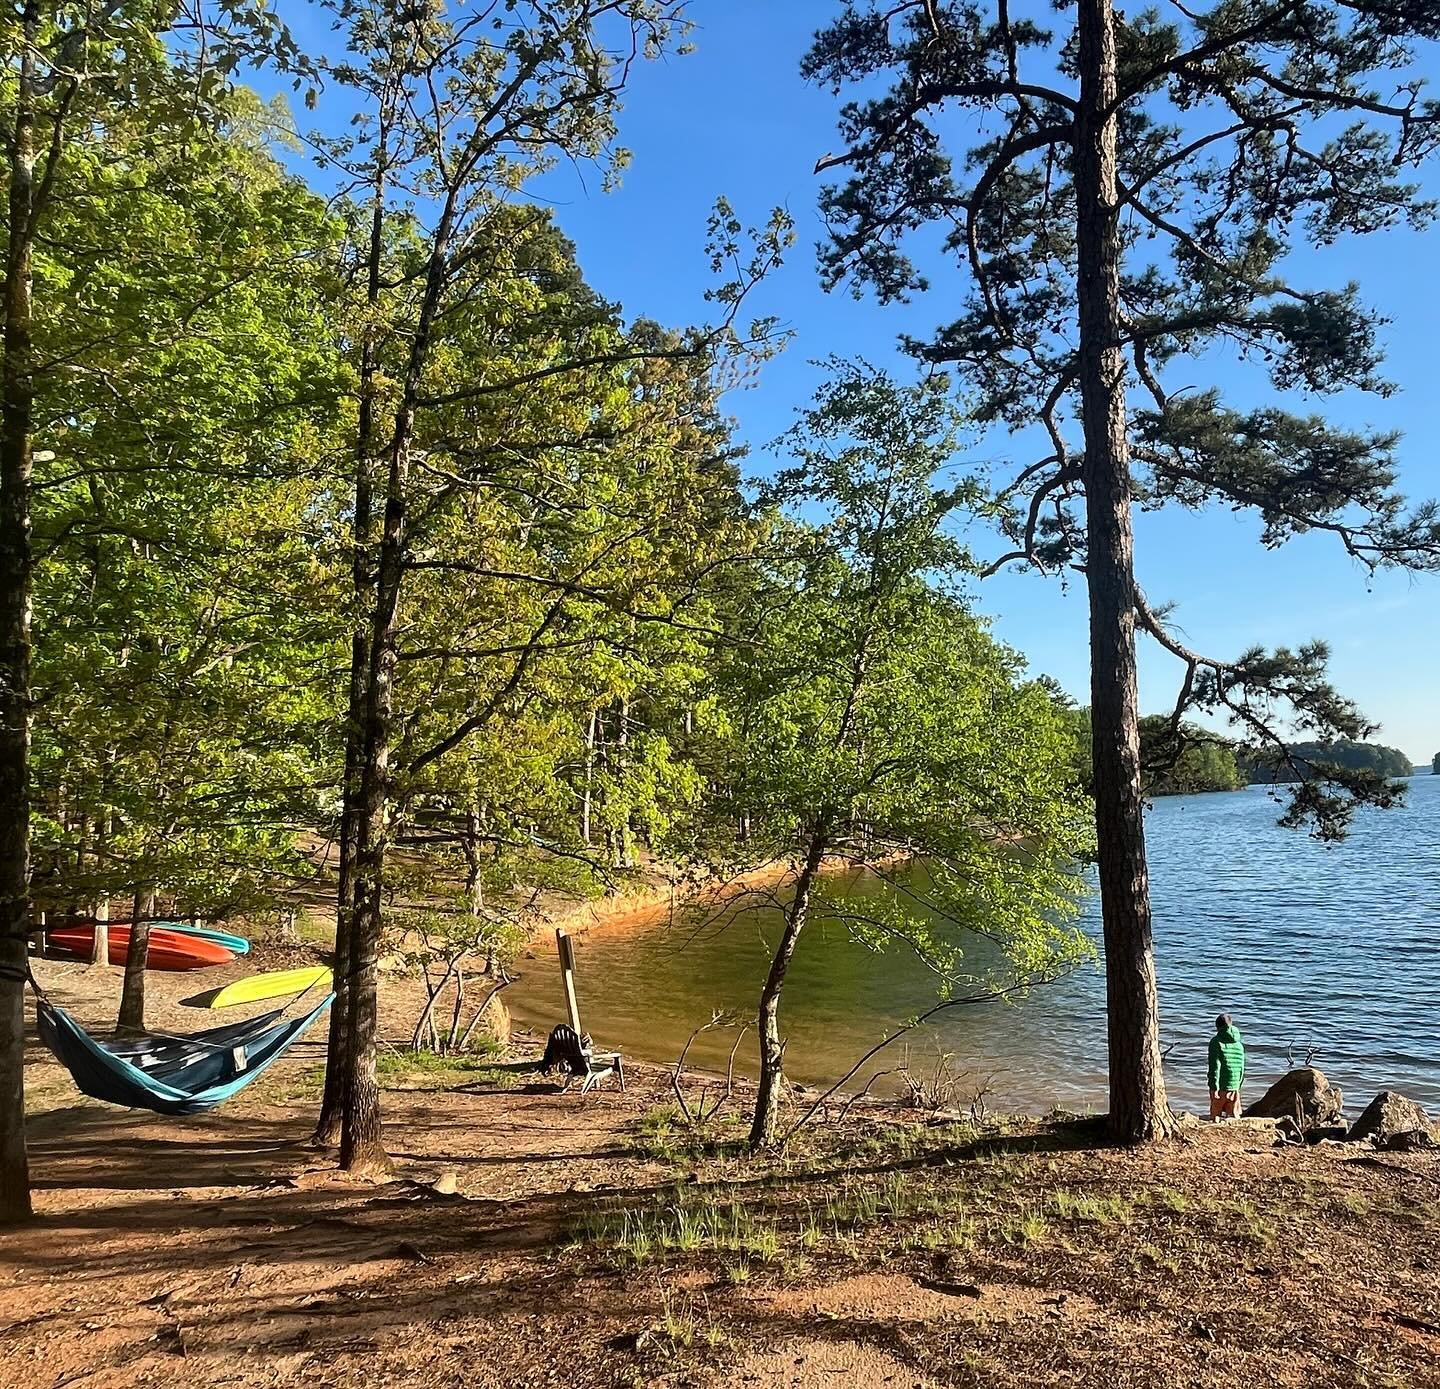 Georgia is blowing our minds. Great place for a family holiday.